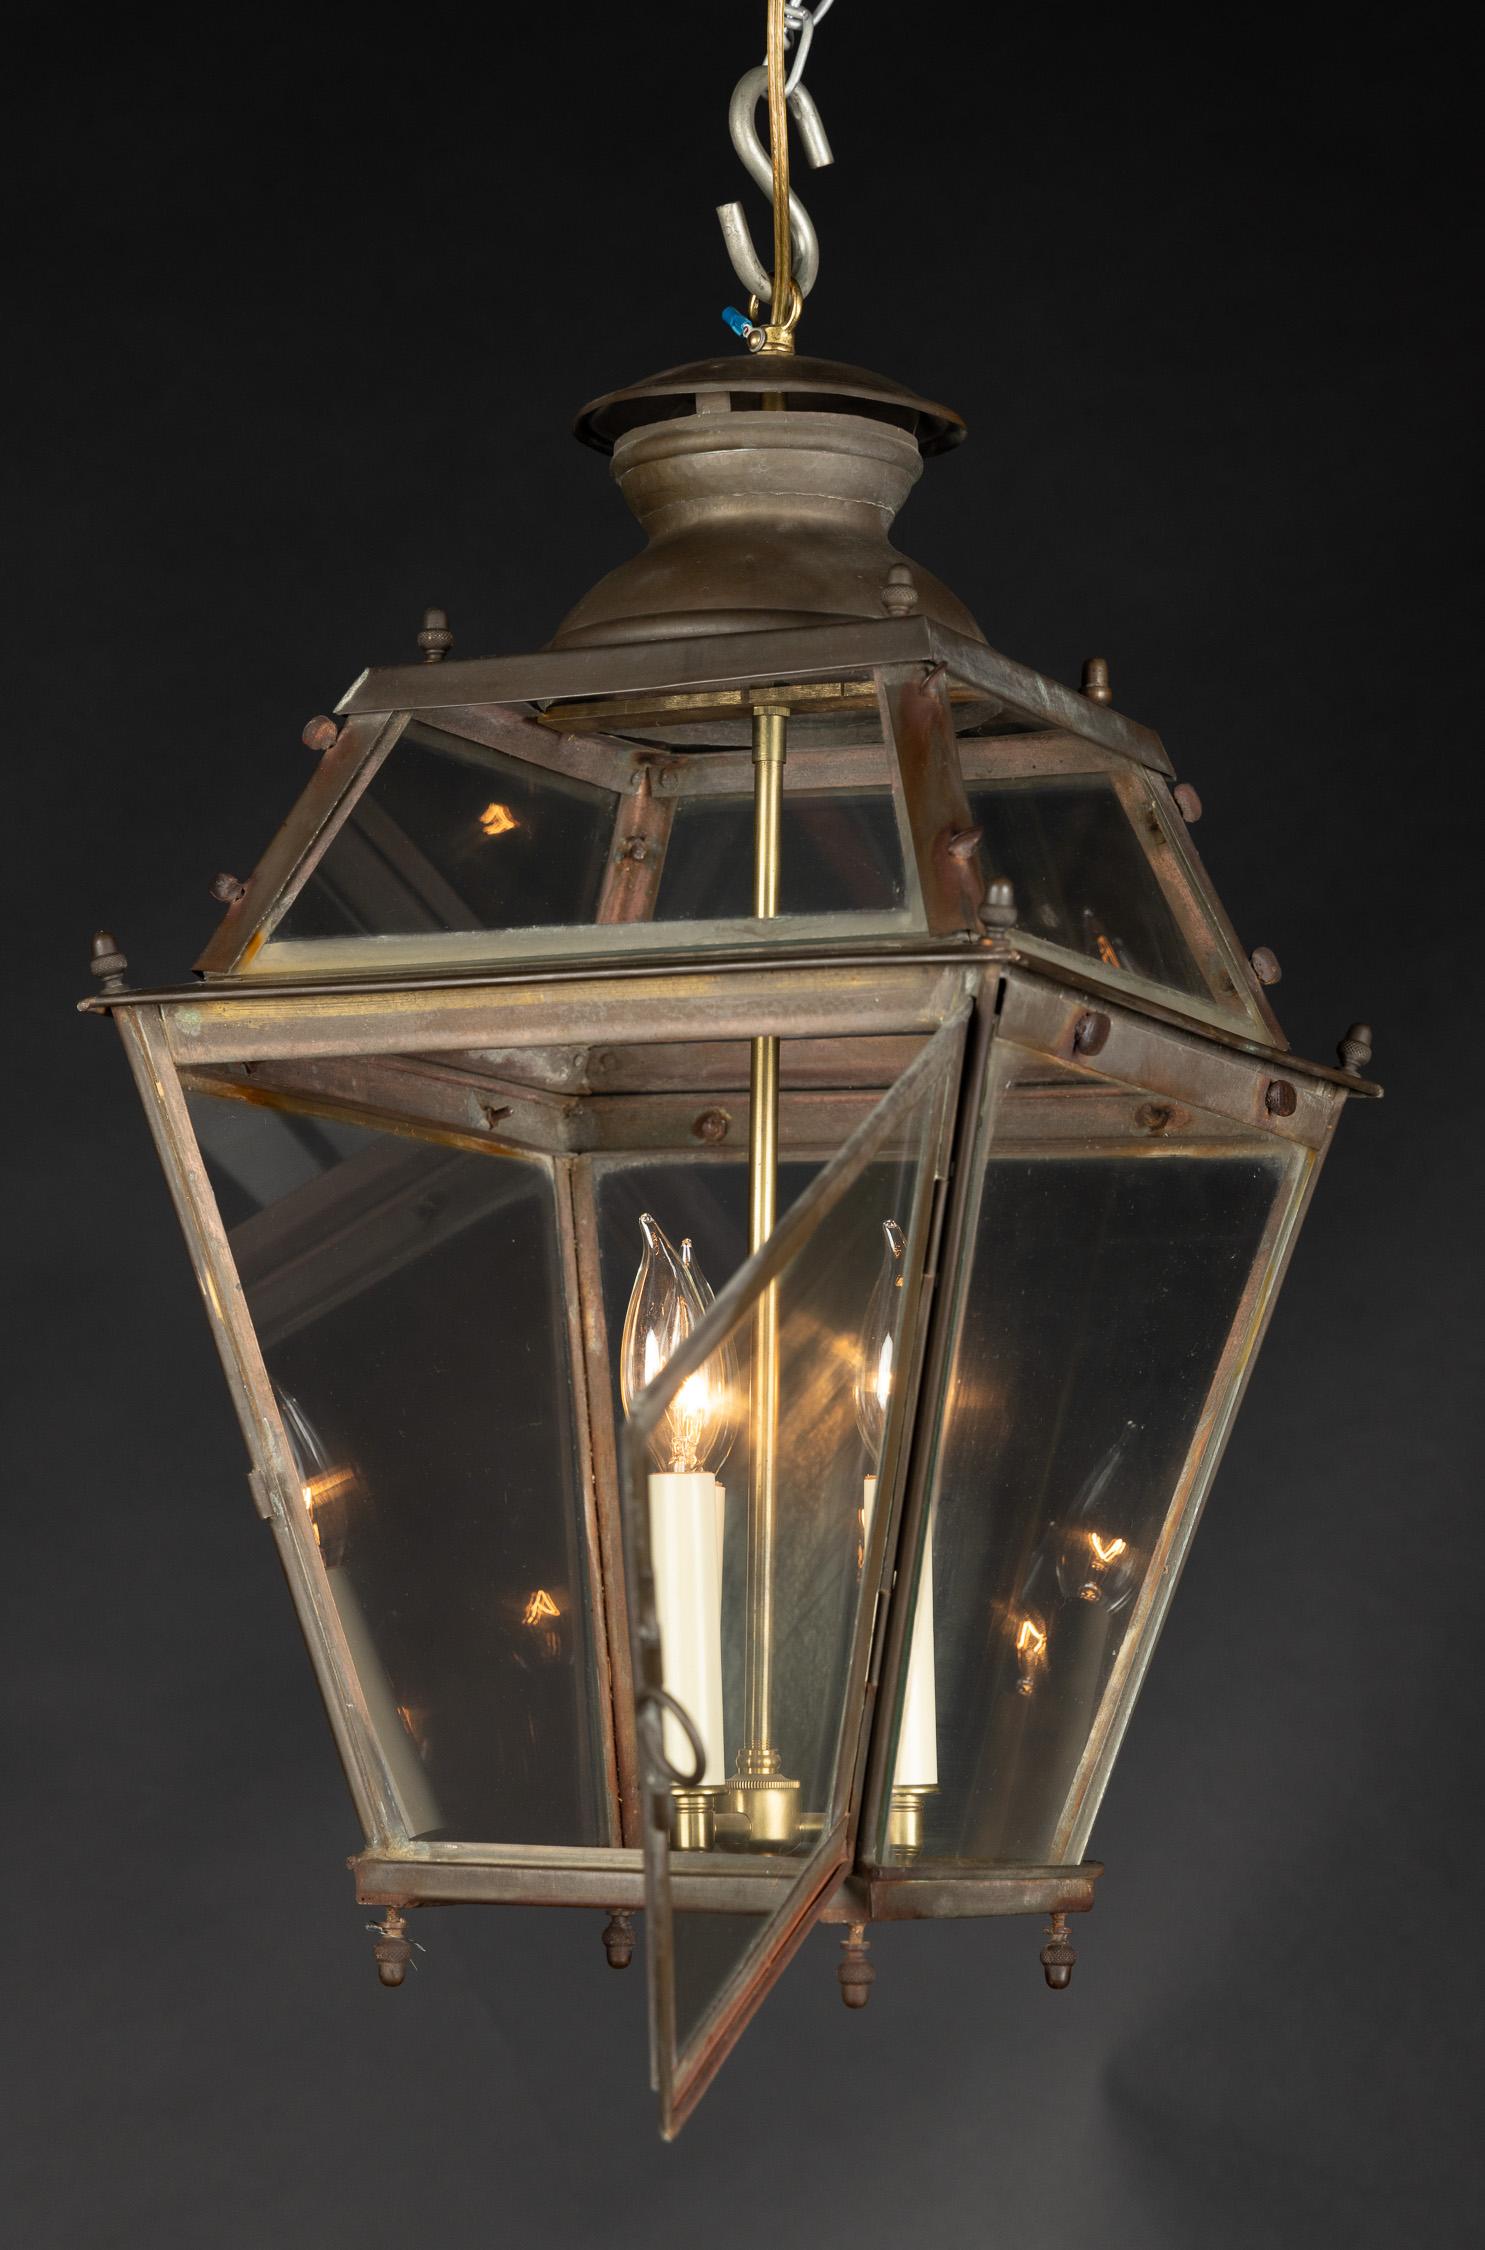 This beautiful copper lantern features glass panes and is adorned with acorn finials at all four corners of top, middle, and bottom. The French antique piece dates back to the Early 19th century and plays host to a unique glass top as well as a